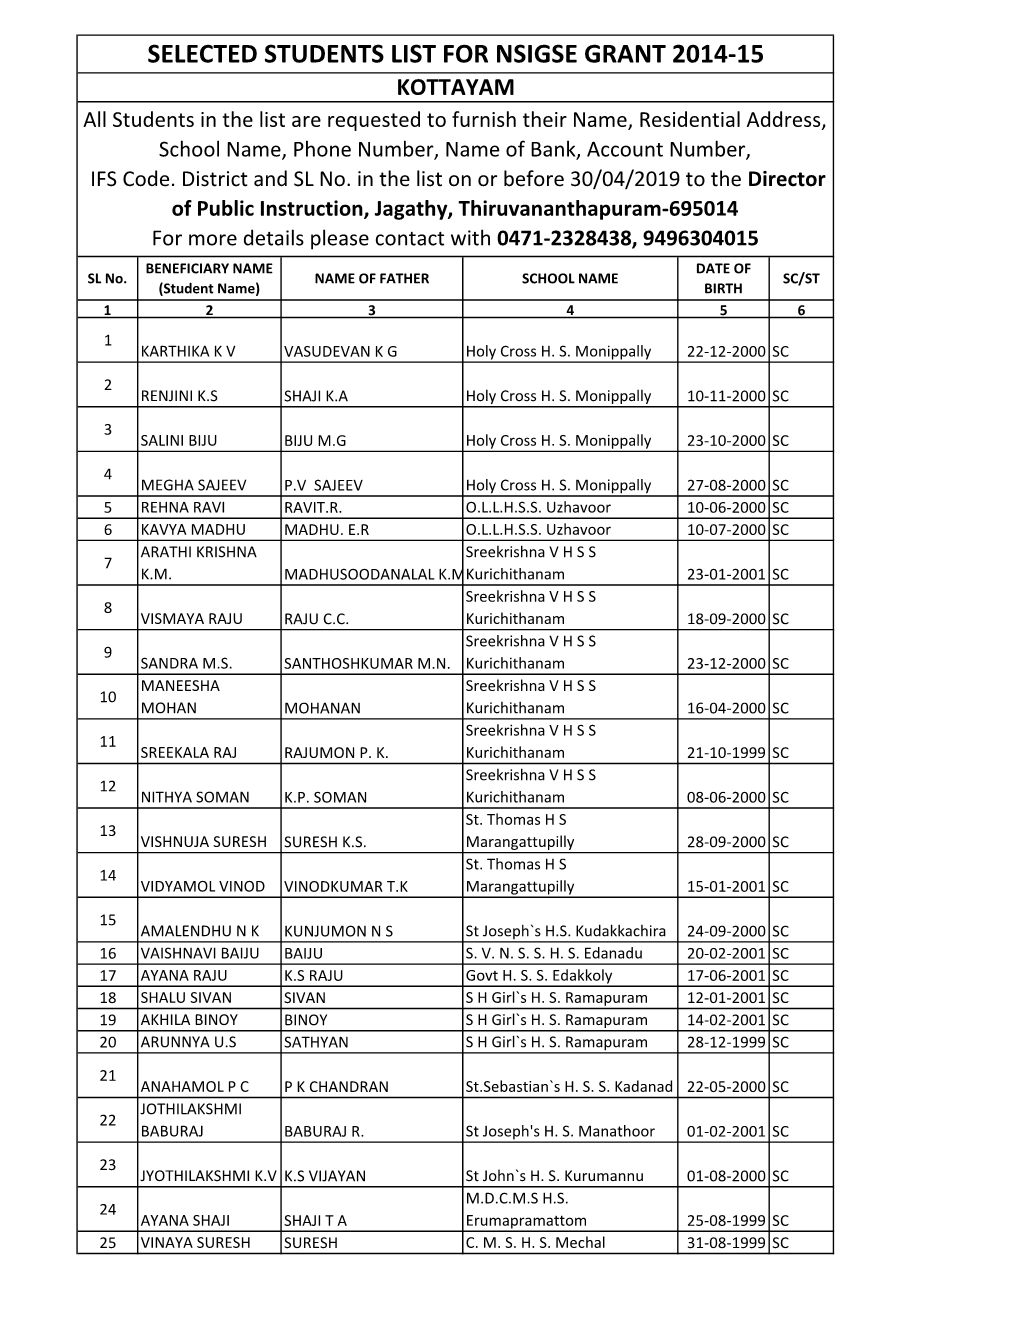 KOTTAYAM All Students in the List Are Requested to Furnish Their Name, Residential Address, School Name, Phone Number, Name of Bank, Account Number, IFS Code